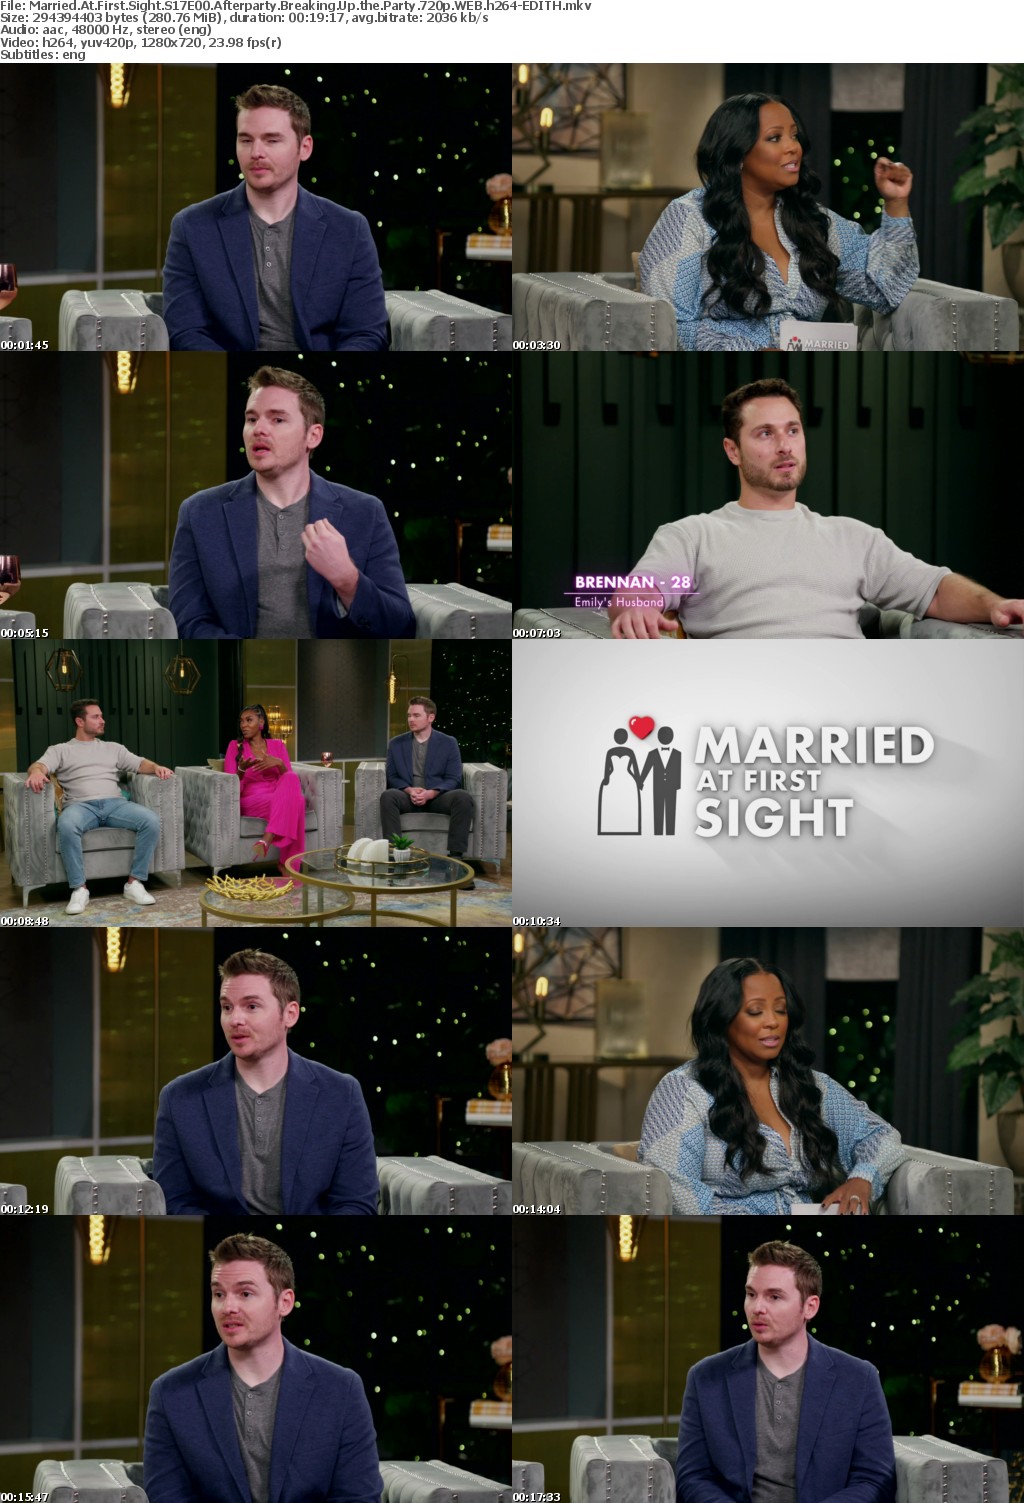 Married At First Sight S17E00 Afterparty Breaking Up the Party 720p WEB h264-EDITH